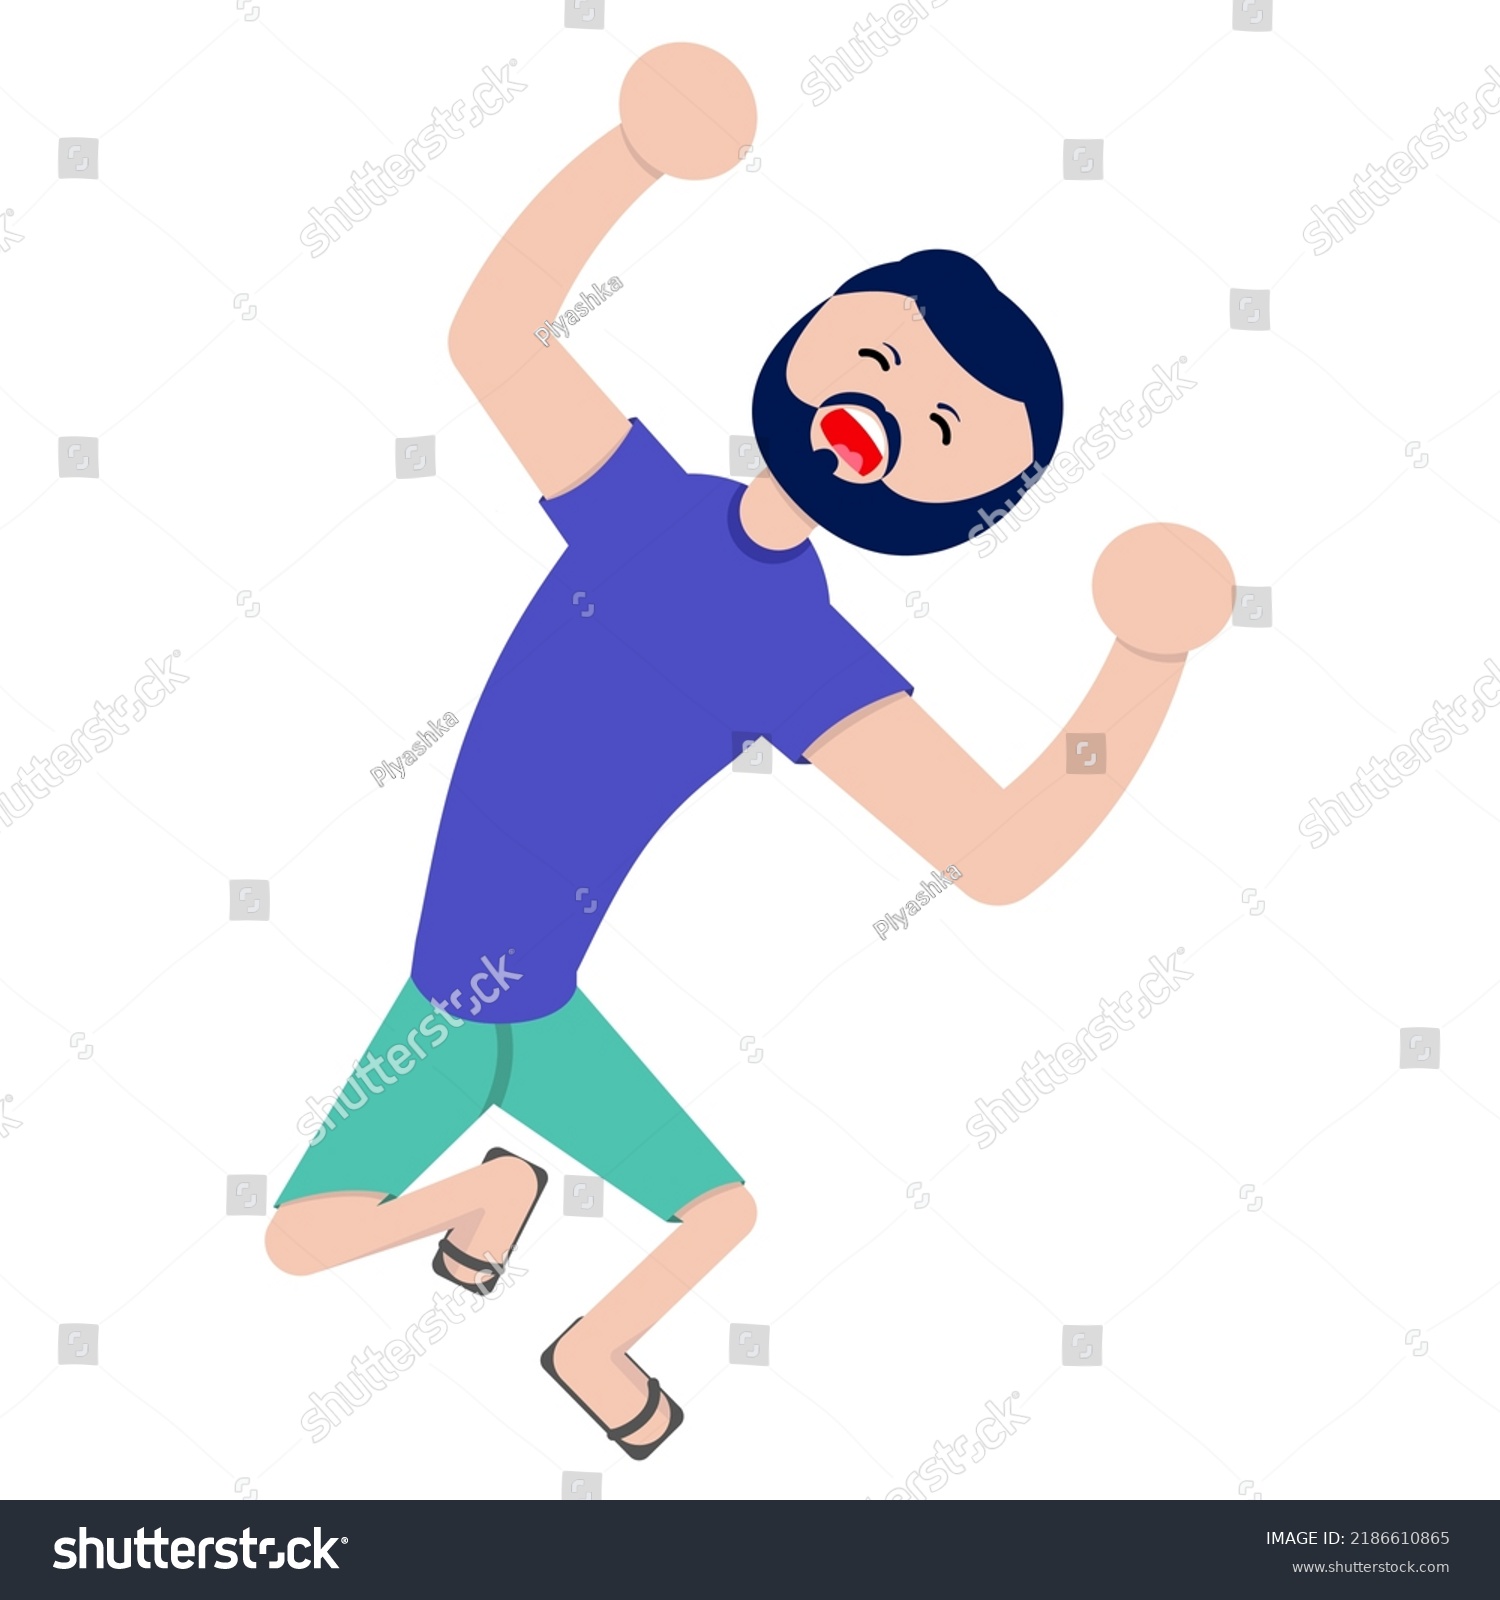 SVG of flat vector illustration. joyful man in a blue t-shirt and green shorts in flight 20-30 years old. for book, covers. svg